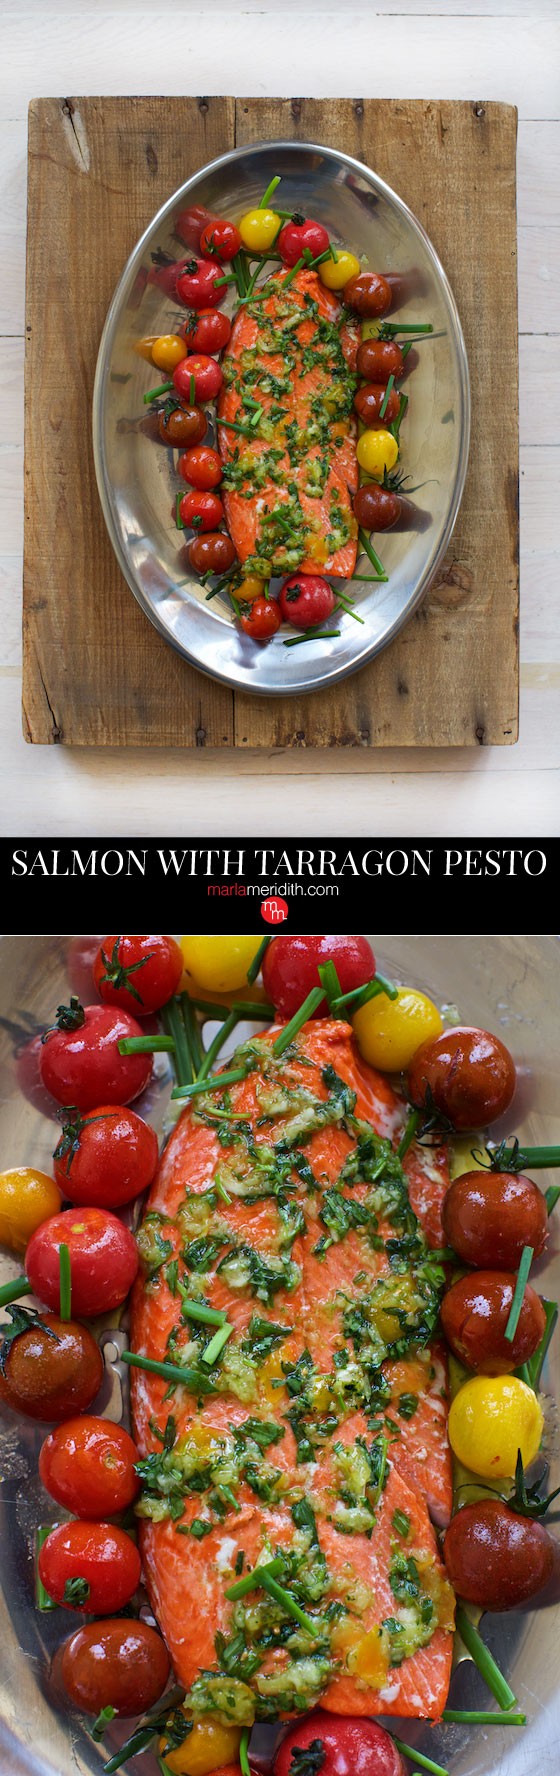 This Salmon with Tarragon Pesto #recipe bright has flavor & perfect for Spring lunches, dinners and entertaining. Enjoy! MarlaMeridith.com ( @marlameridith )